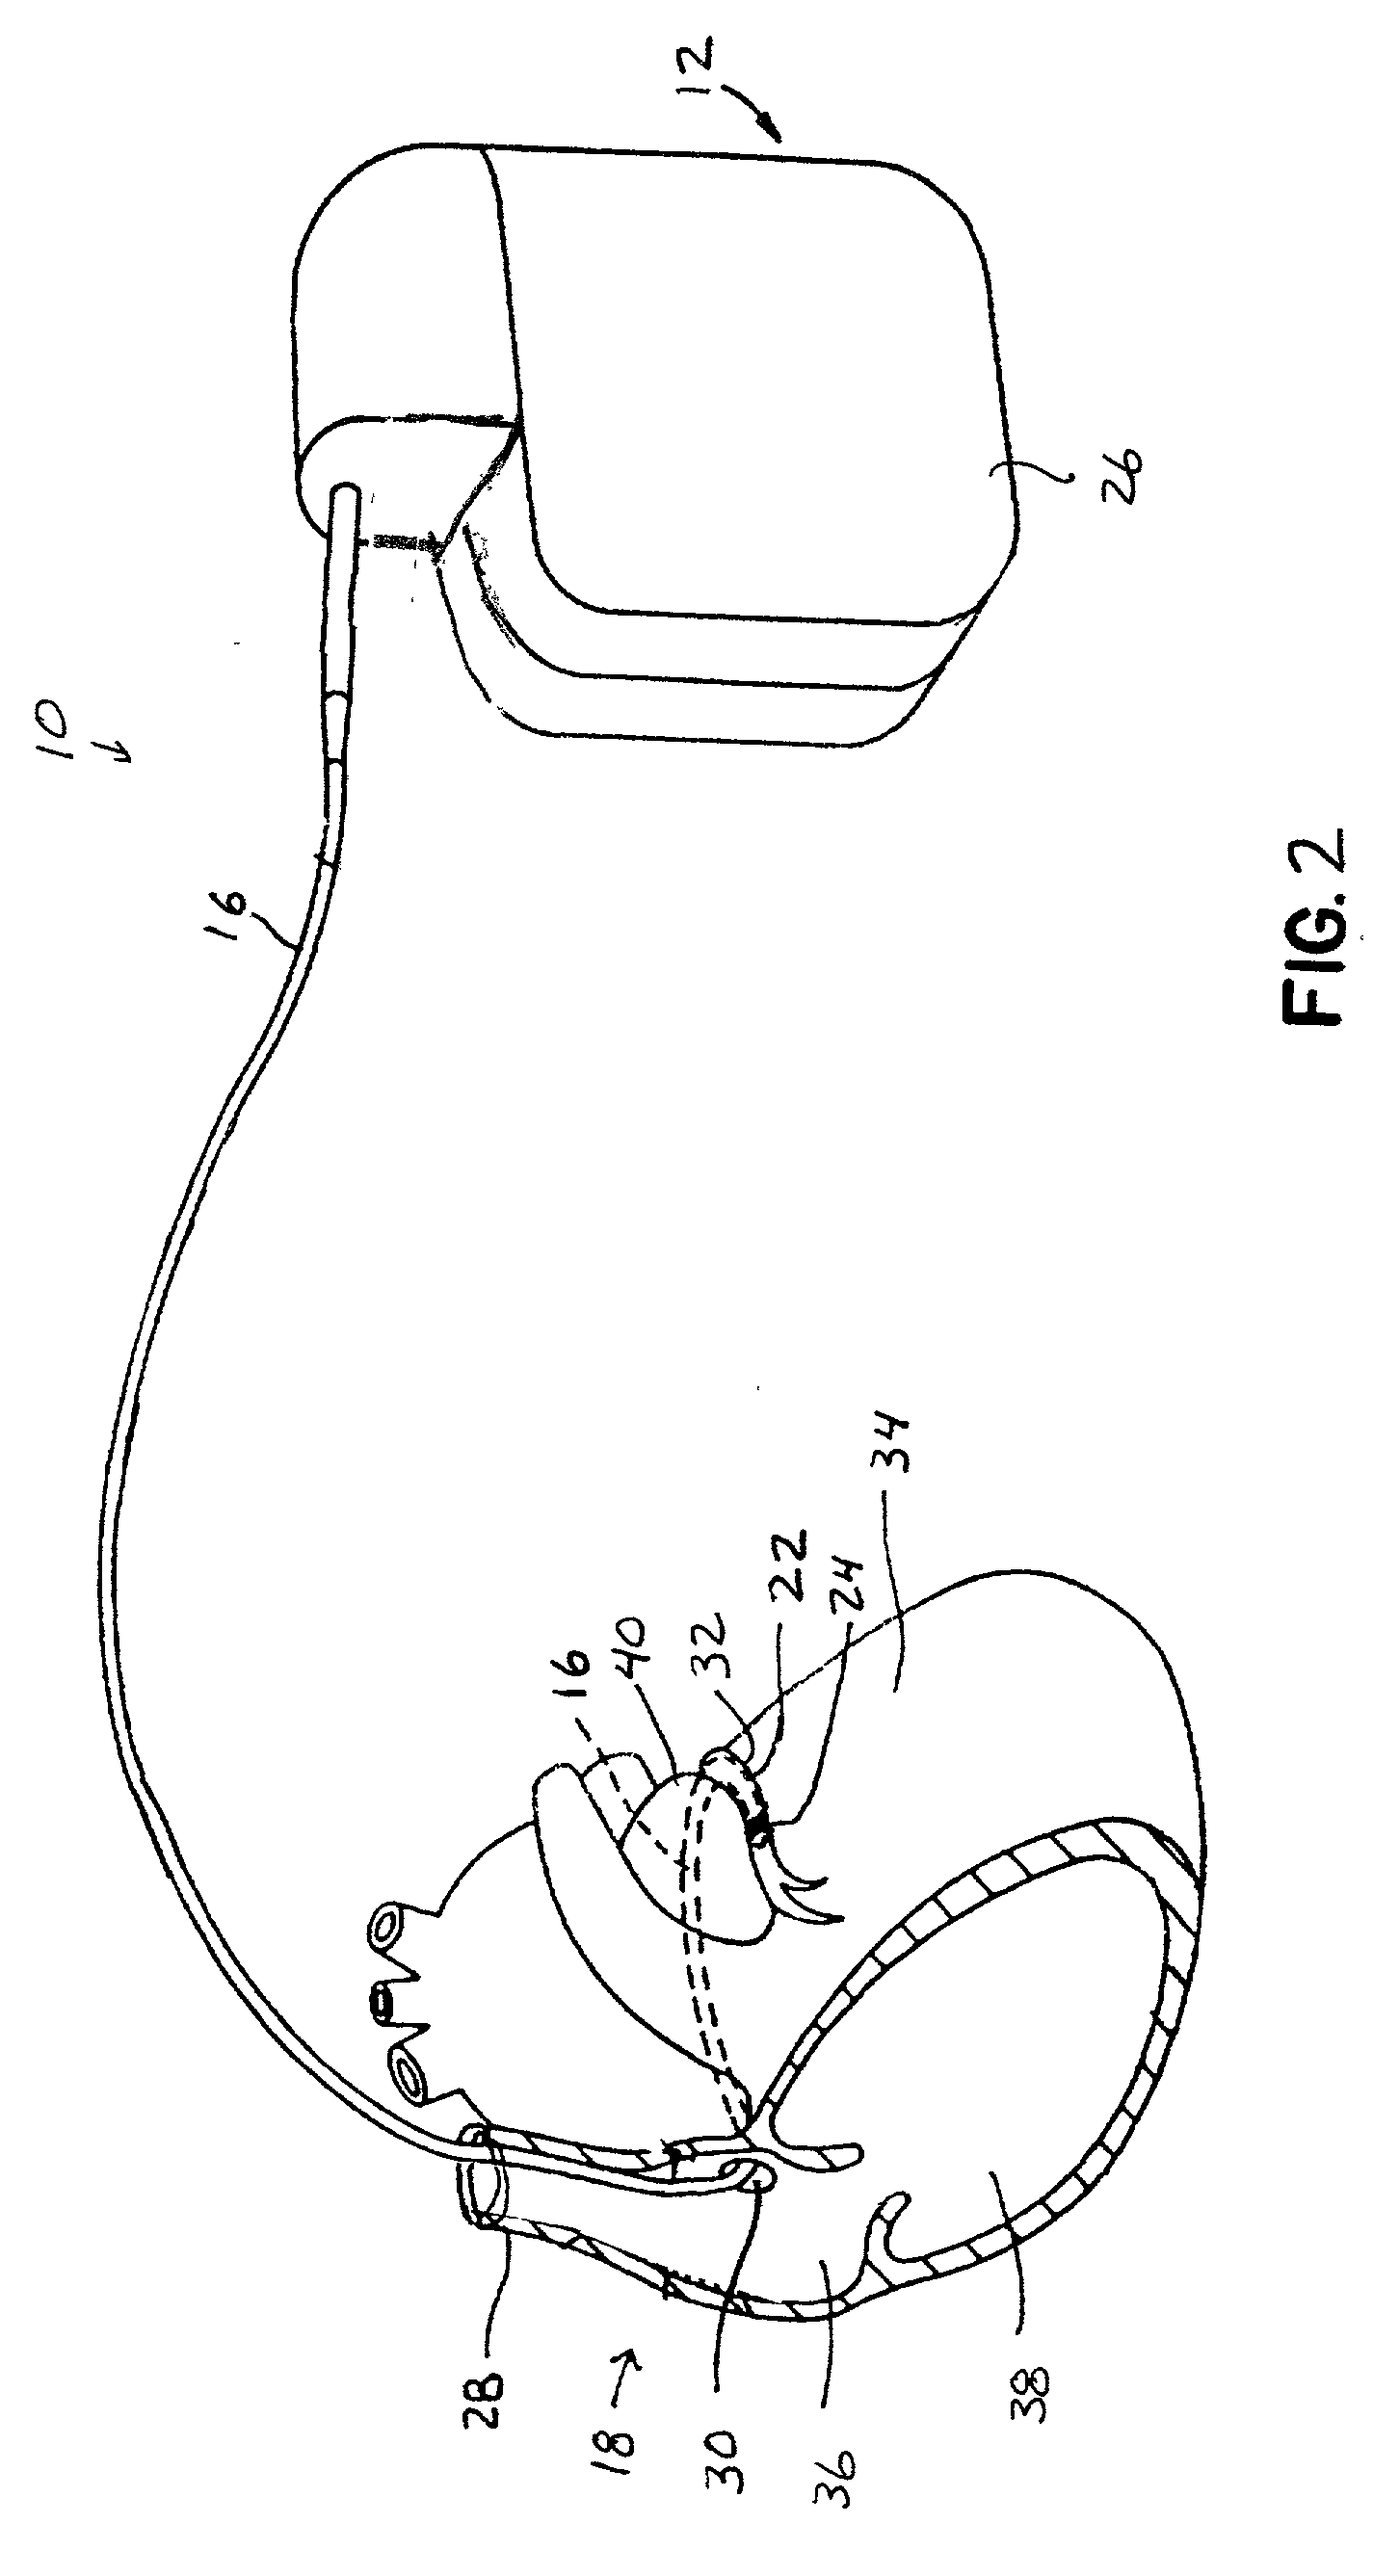 Method and apparatus for shielding wire for MRI resistant electrode systems